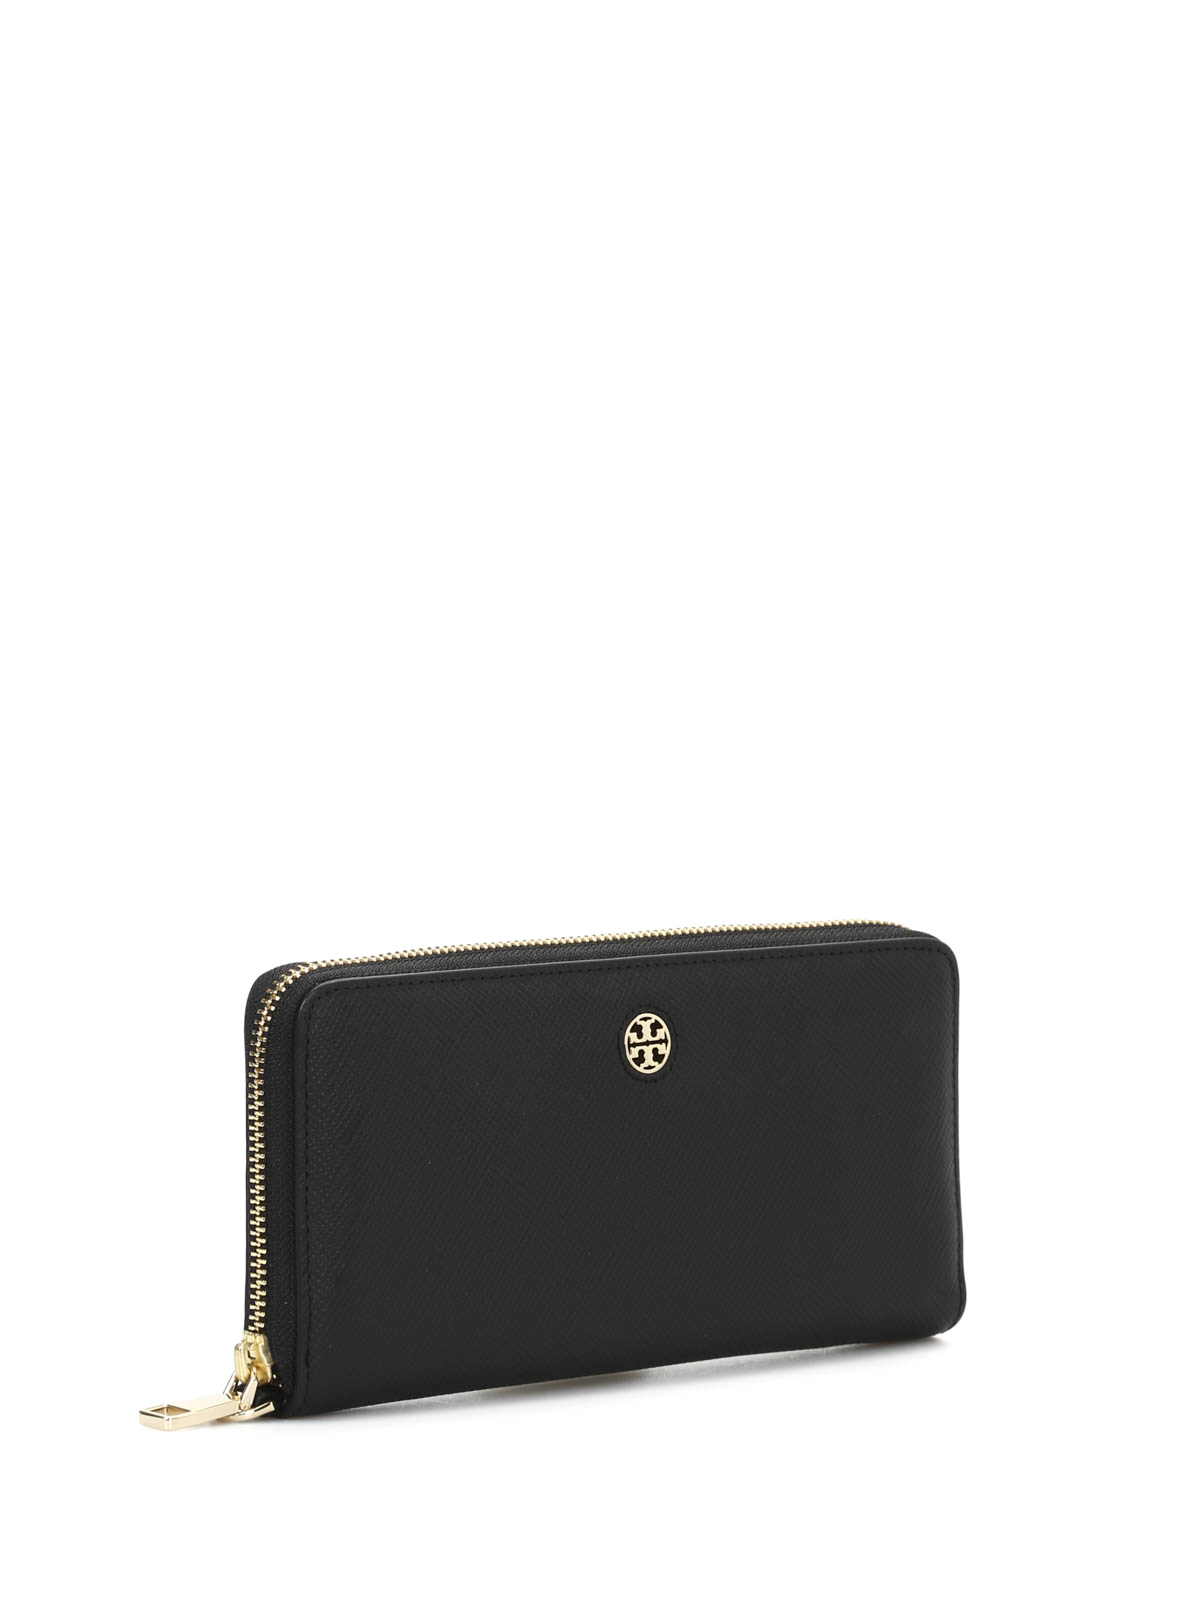 Wallets & purses Tory Burch - Perry zip continental wallet - 29998001